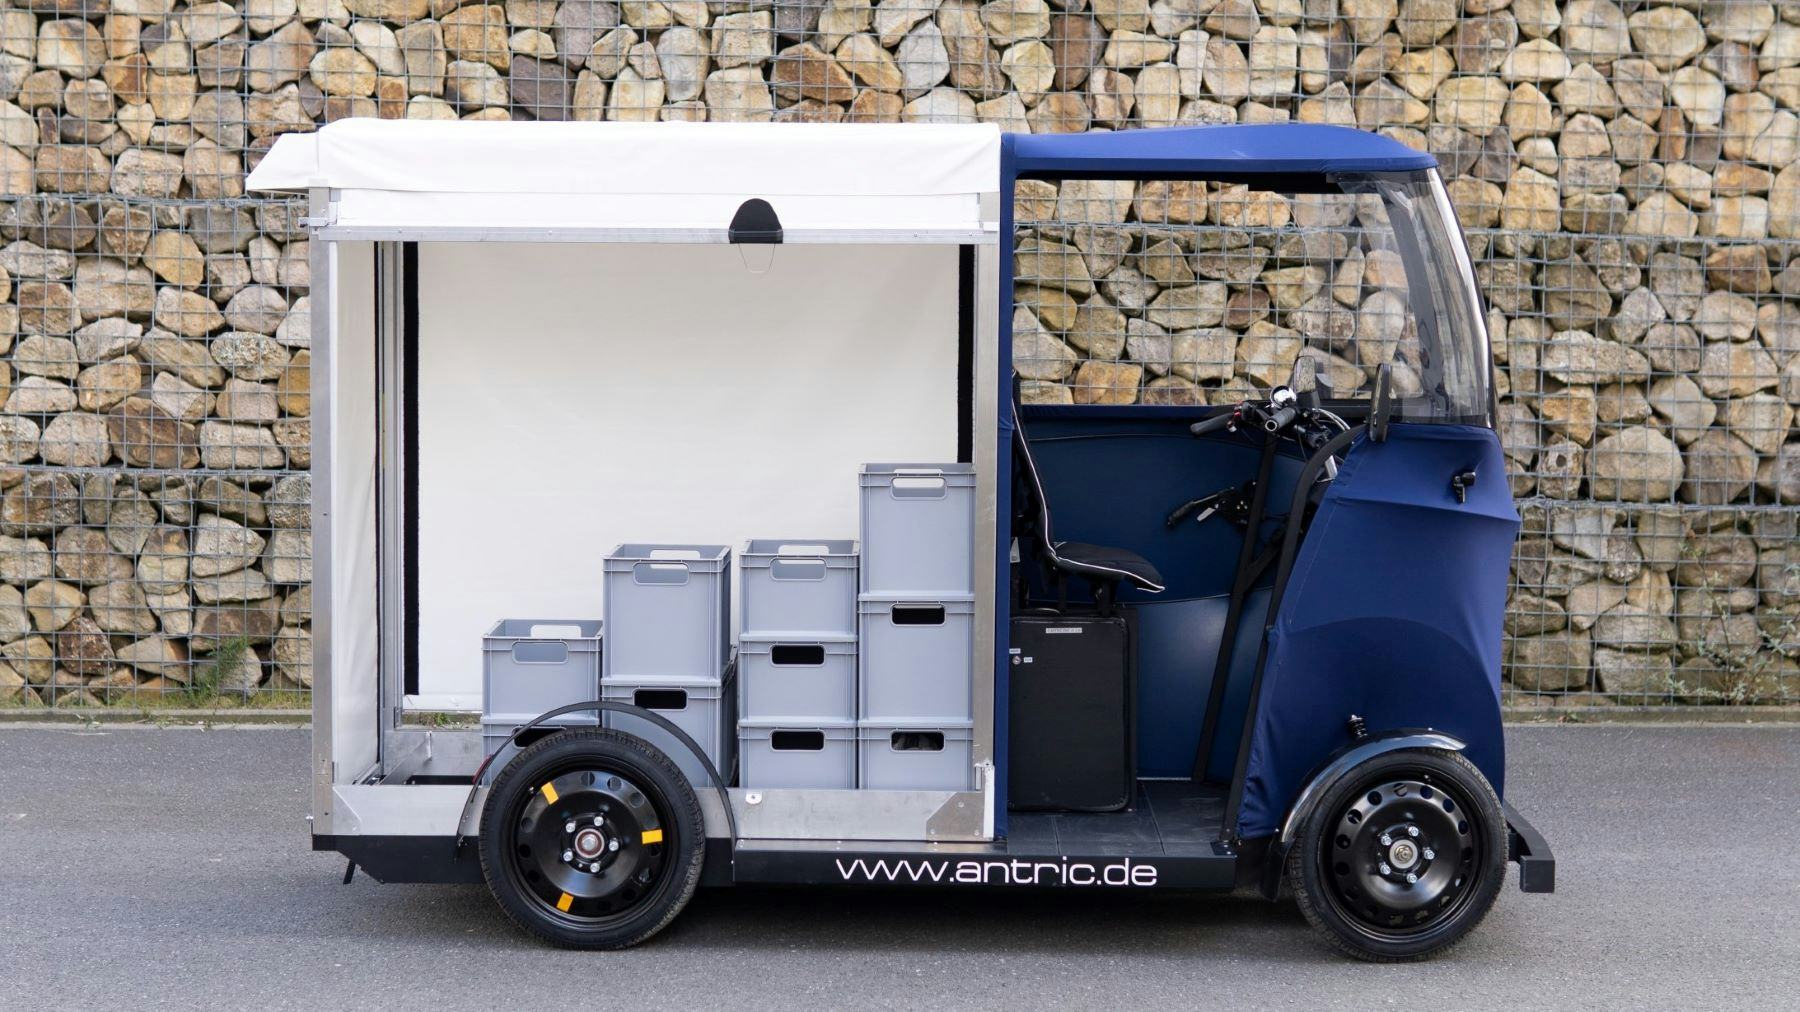 The Antric One is an auto-grade four-wheeled e-cargo bike that has been successfully piloted in Europe. - Photo Antric